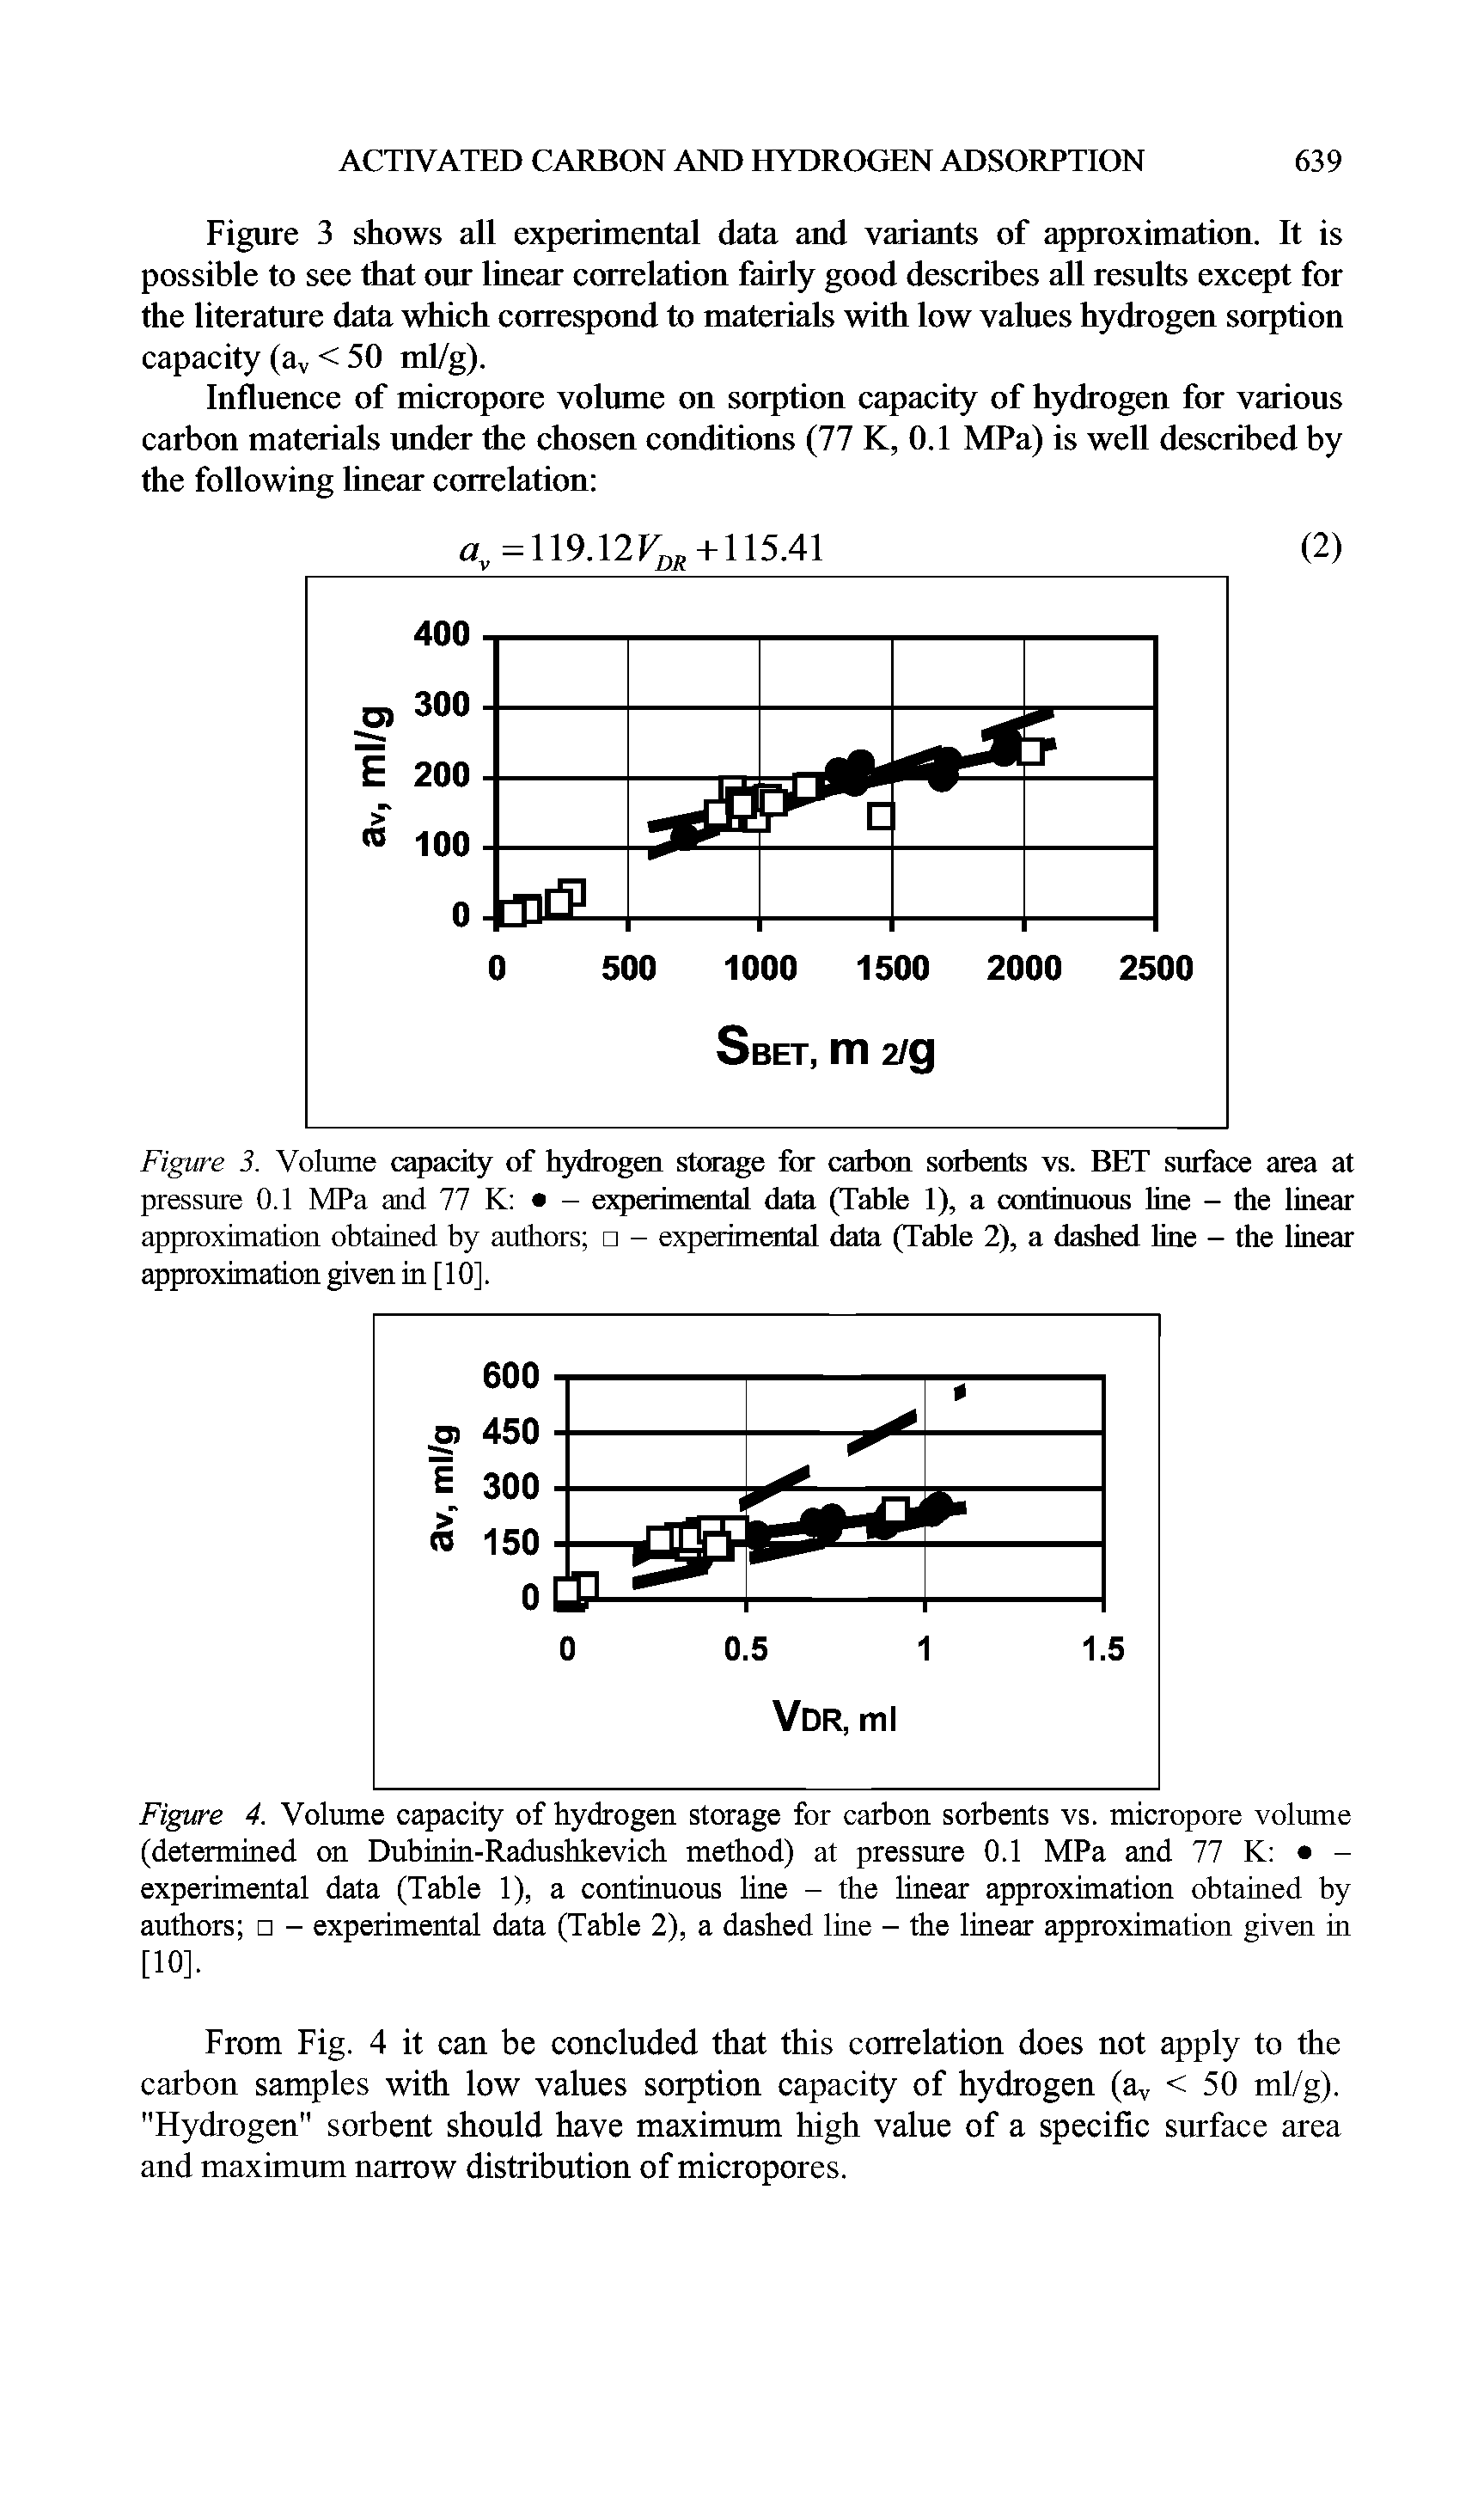 Figure 4. Volume capacity of hydrogen storage for carbon sorbents vs. micropore volume (determined on Dubinin-Radushkevich method) at pressure 0.1 MPa and 77 K -experimental data (Table 1), a continuous line - the linear approximation obtained by authors - experimental data (Table 2), a dashed line - the linear approximation given in [10].